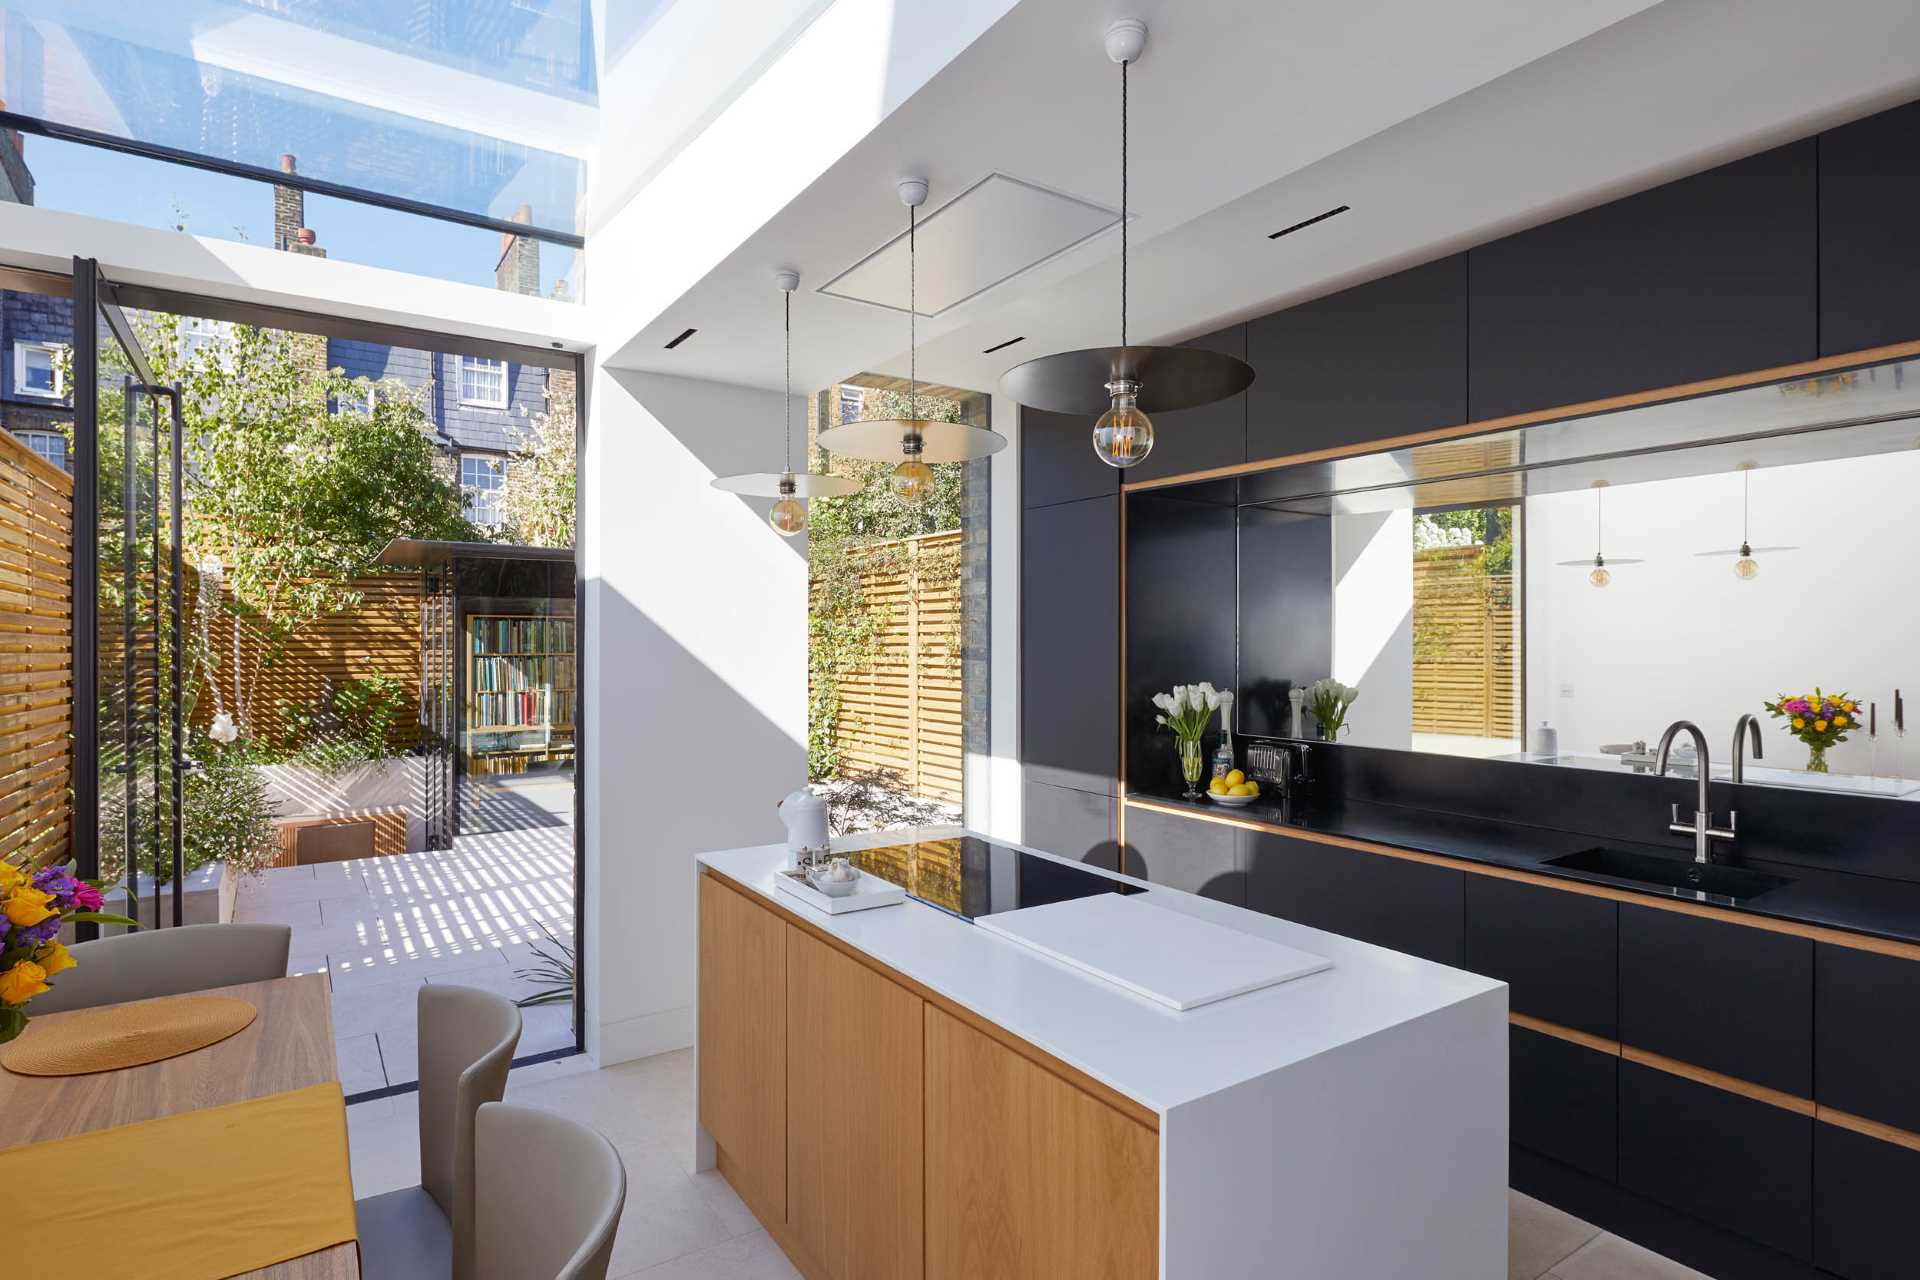 This modern rear addition includes a new kitchen with an island and a small dining area. A partial glass ceiling as well as a floor-to-ceiling window in the kitchen provide ample natural light.